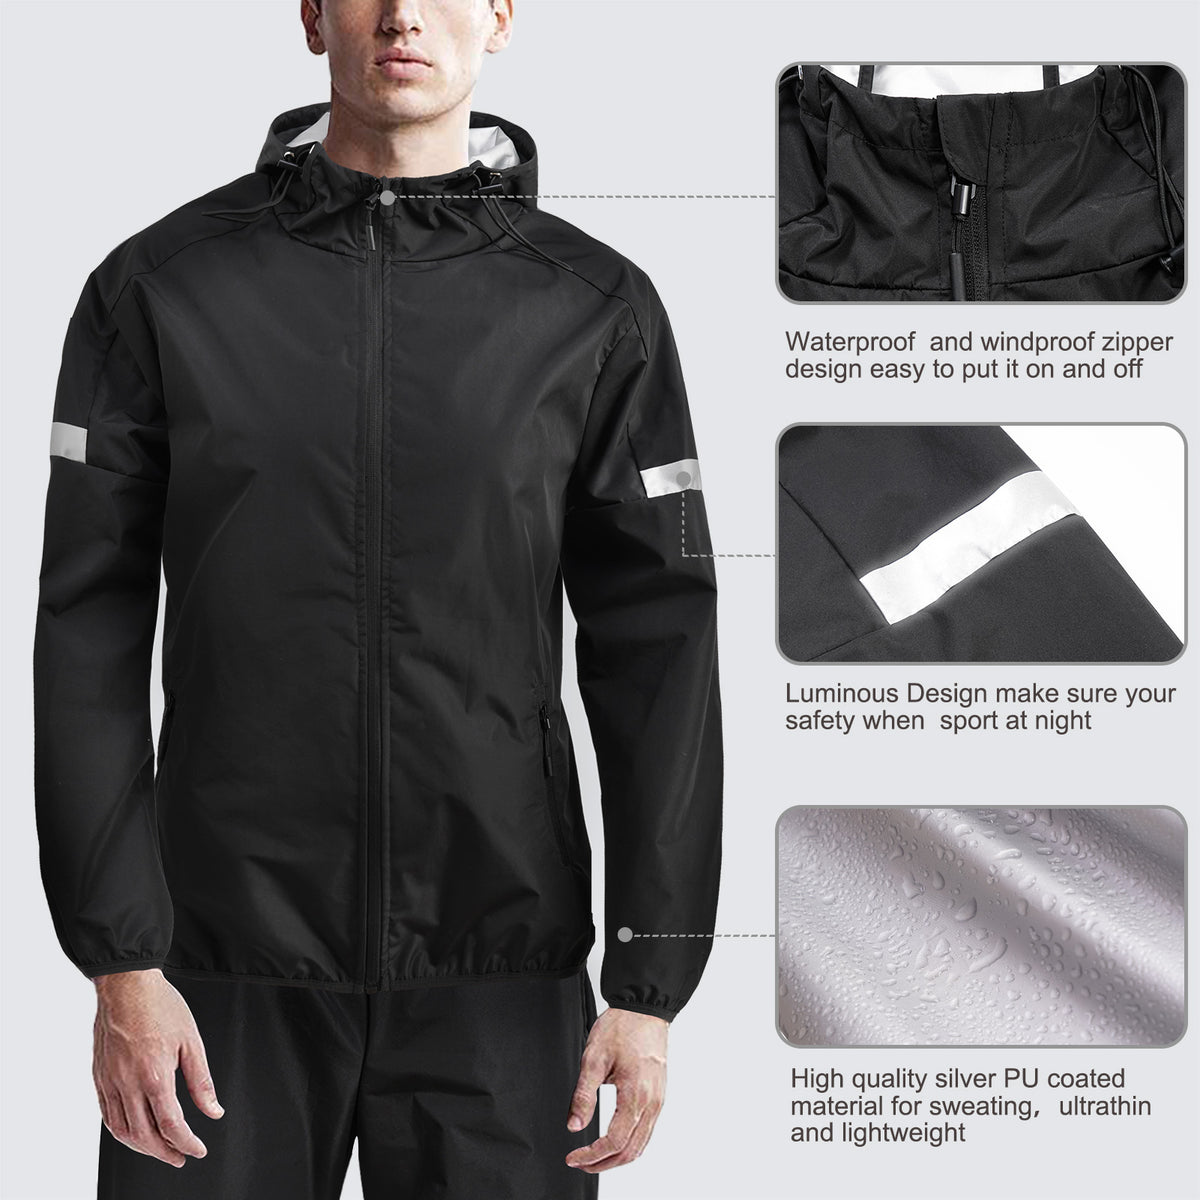 Black Men's Long Sleeve Hot Sauna Hoodies Jacket Suit For Sweating And Fat Burning Details - Nebility